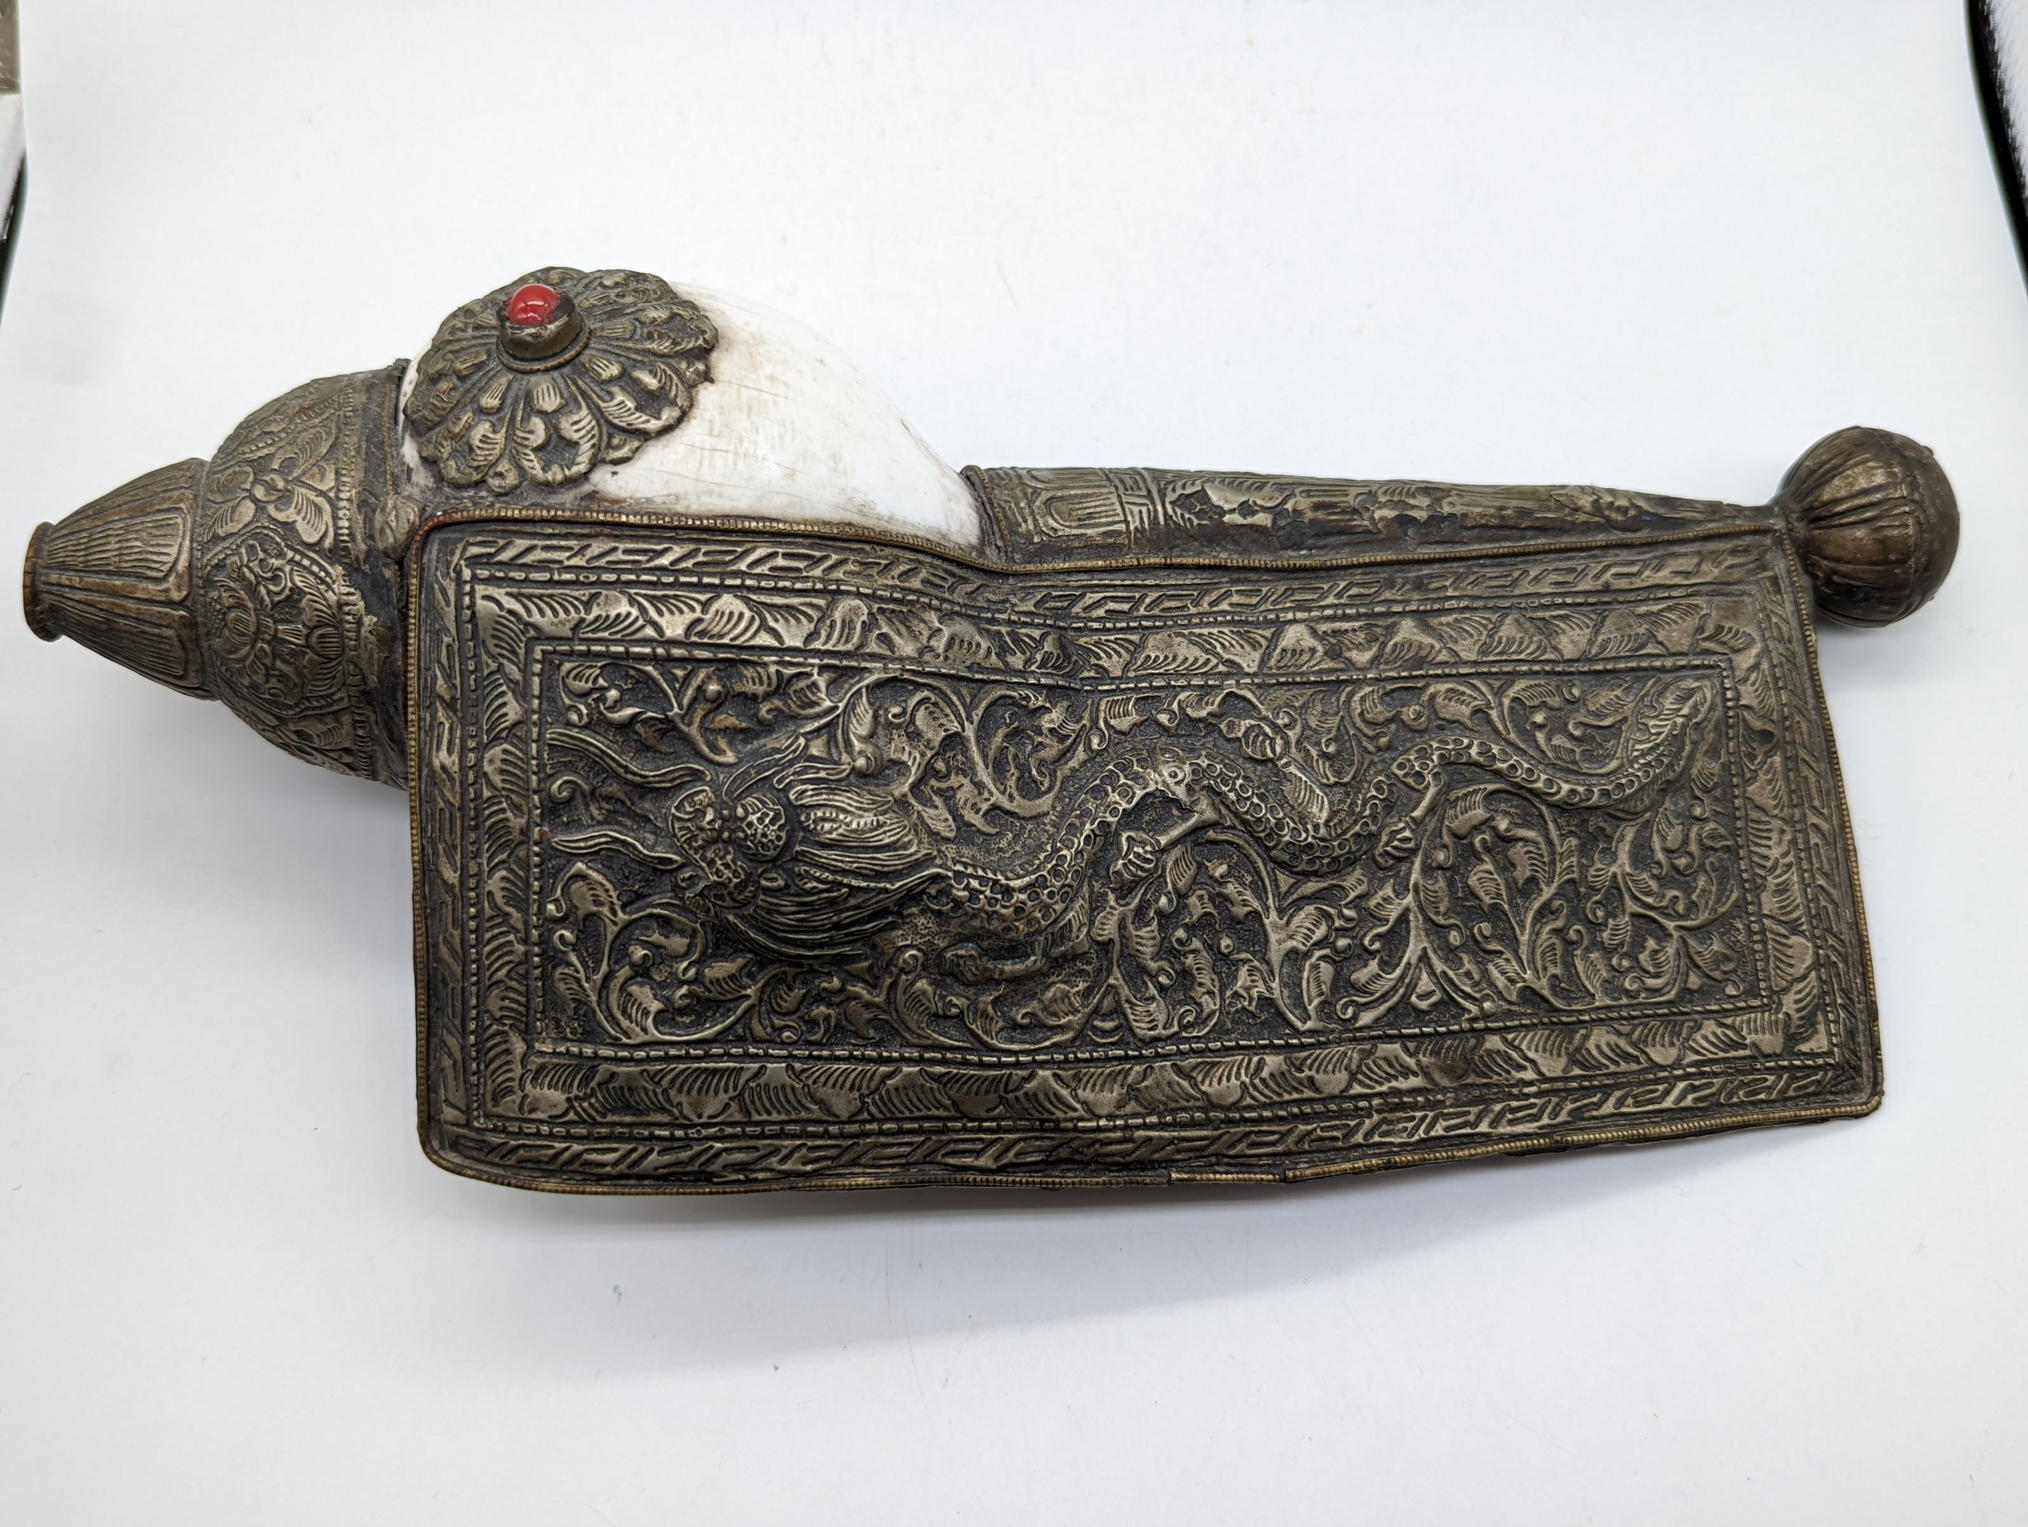 A Tibetan or Nepalese Buddhist Conch Shell Ceremonial Trumpet with White Metal Mount decorated - Image 3 of 4